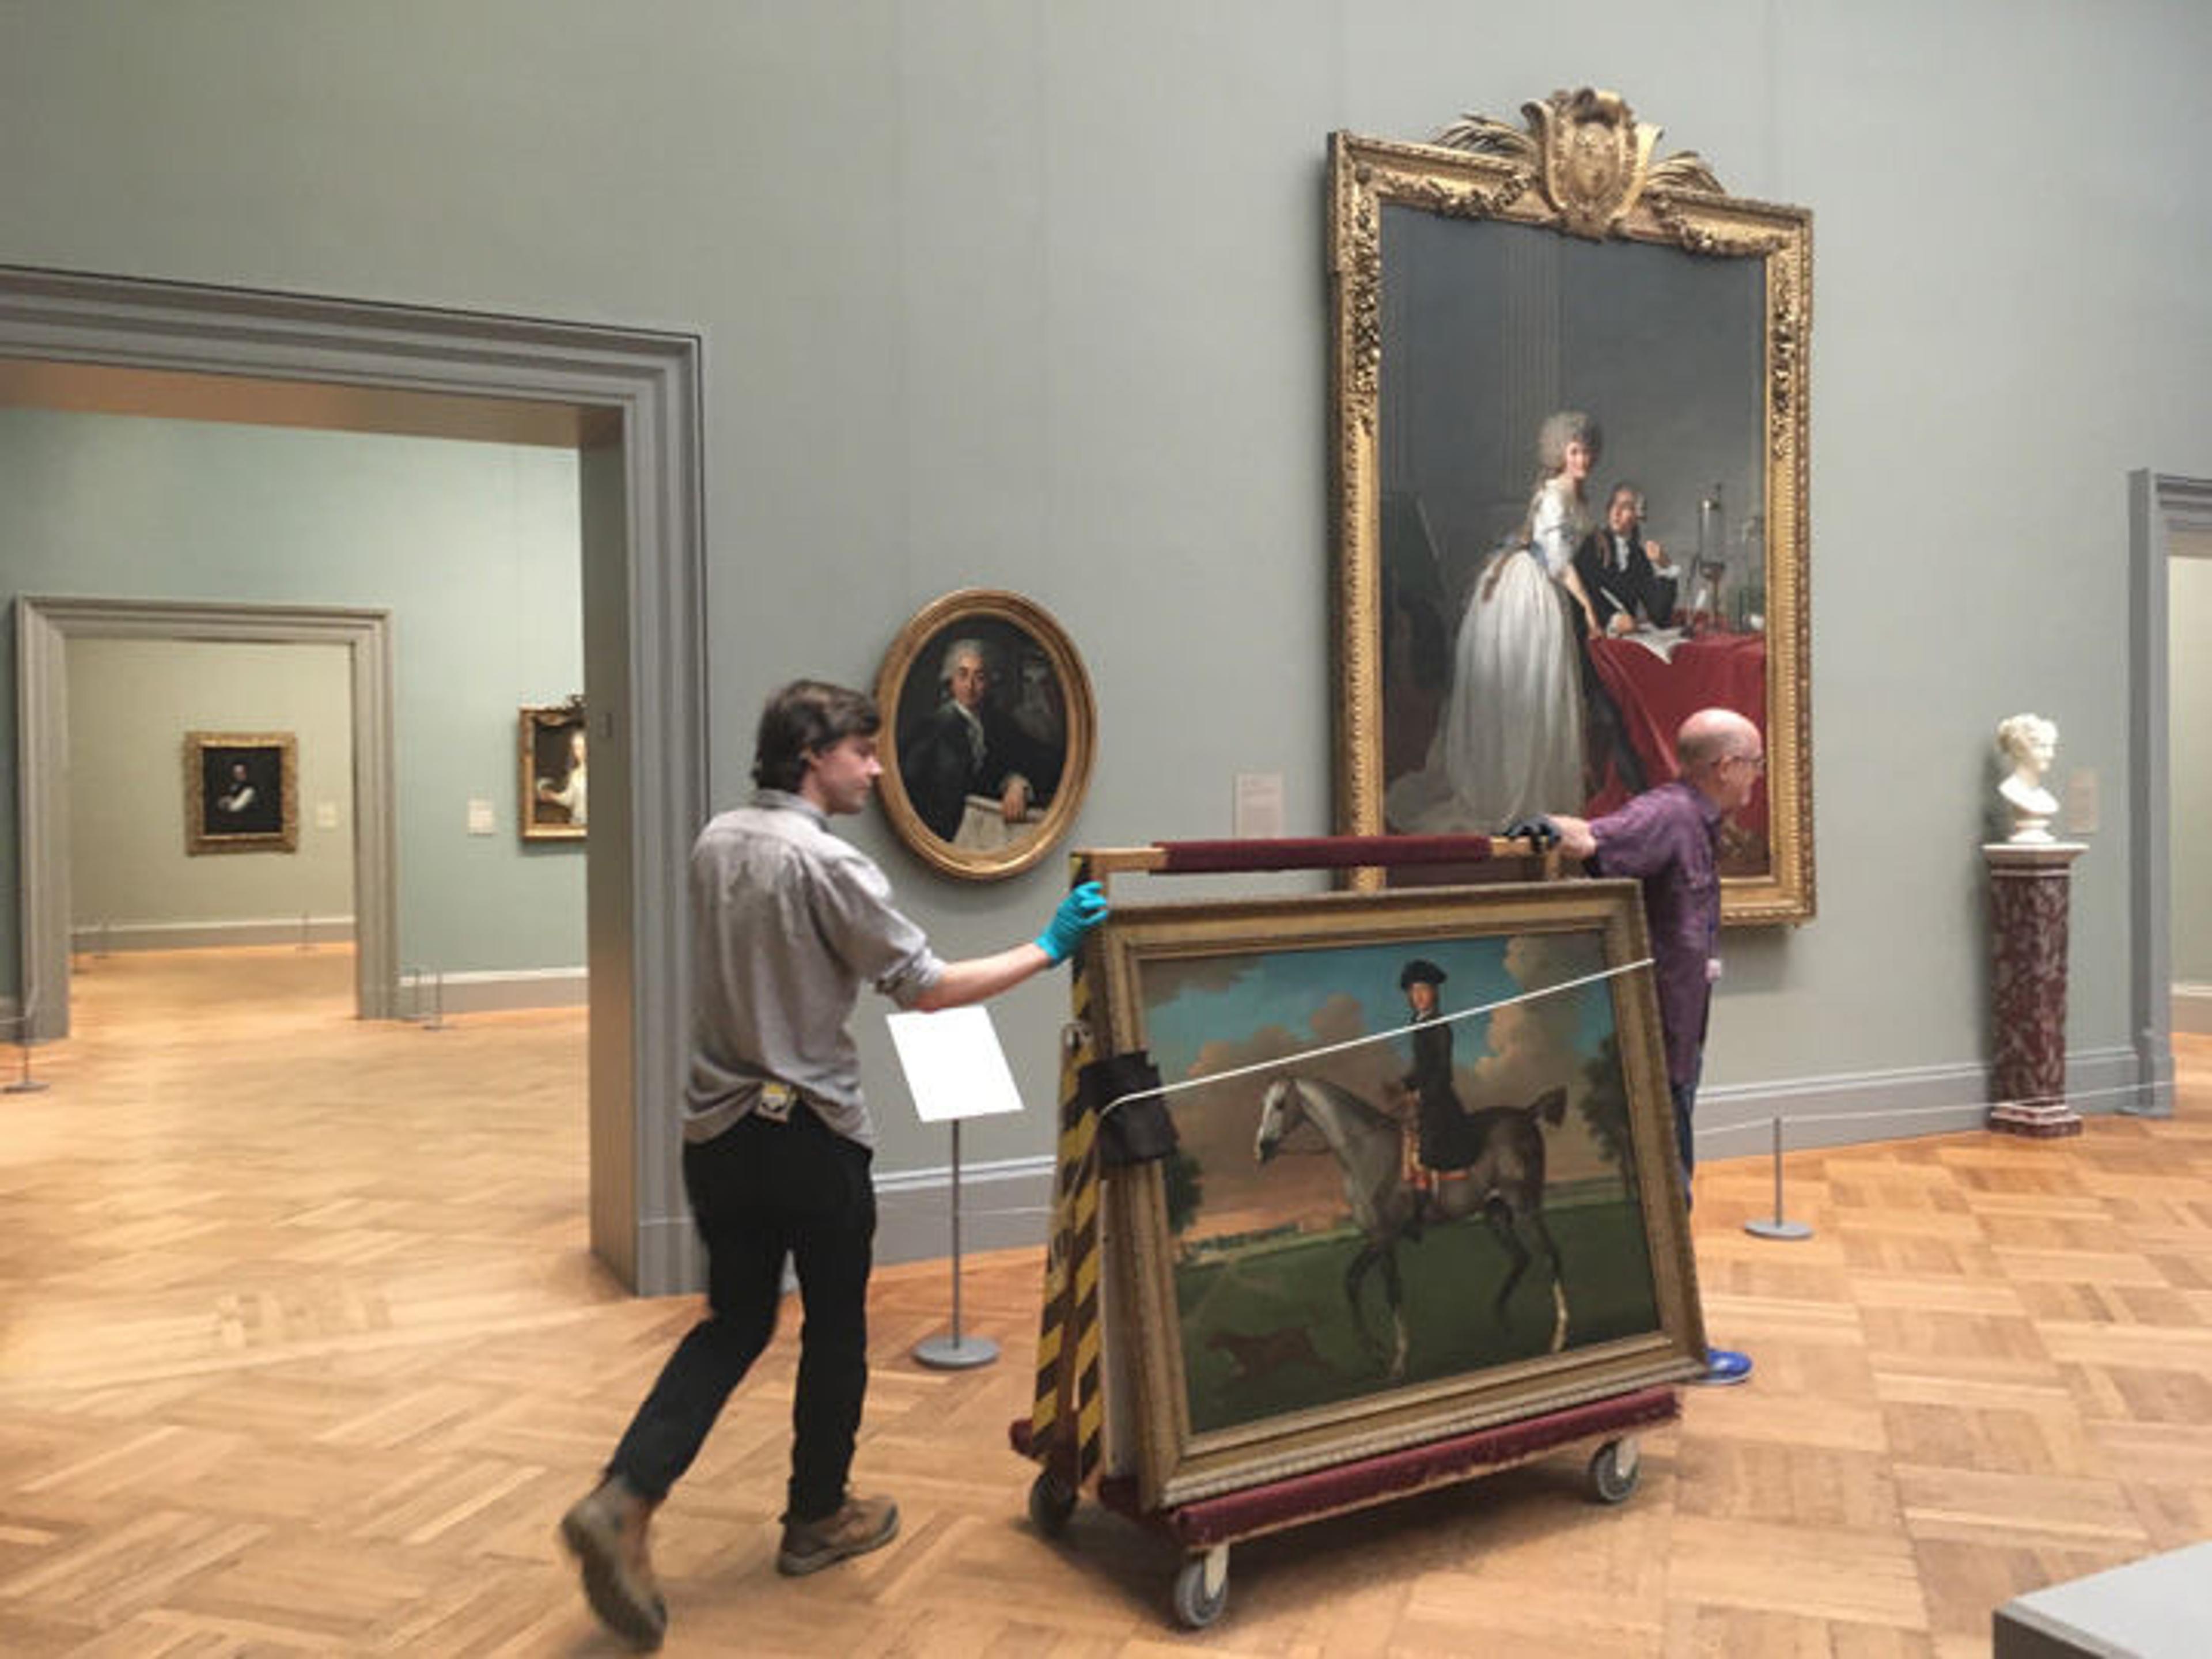 Gallery view showing a painting being moved by two Met technicians